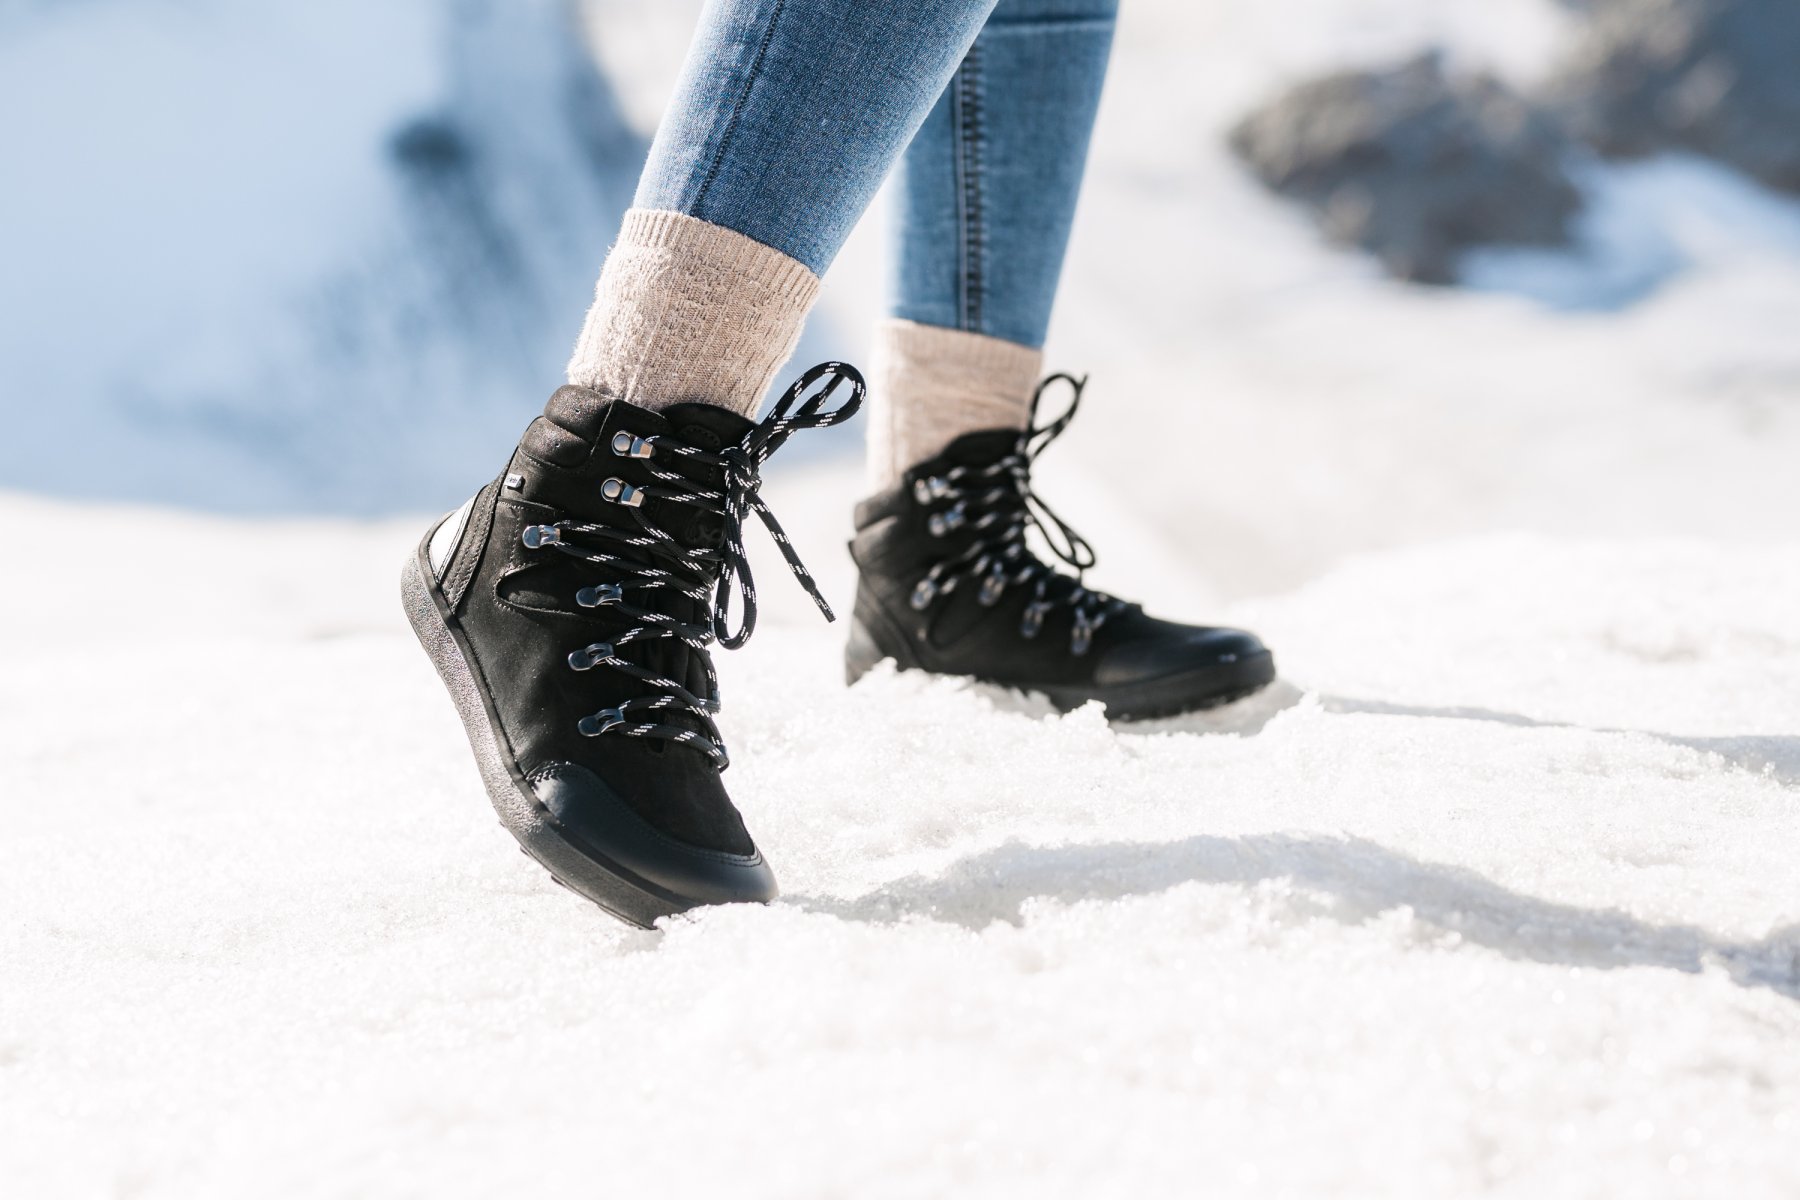  DOTH Boojoy Winter Boots, Unisex Winter Snow Boots Waterproof  Anti-Slip Outdoor Warm Ankle Boots Fur Lined (Black, Adult, Women, 5,  Numeric, US Footwear Size System, Medium) : Clothing, Shoes & Jewelry